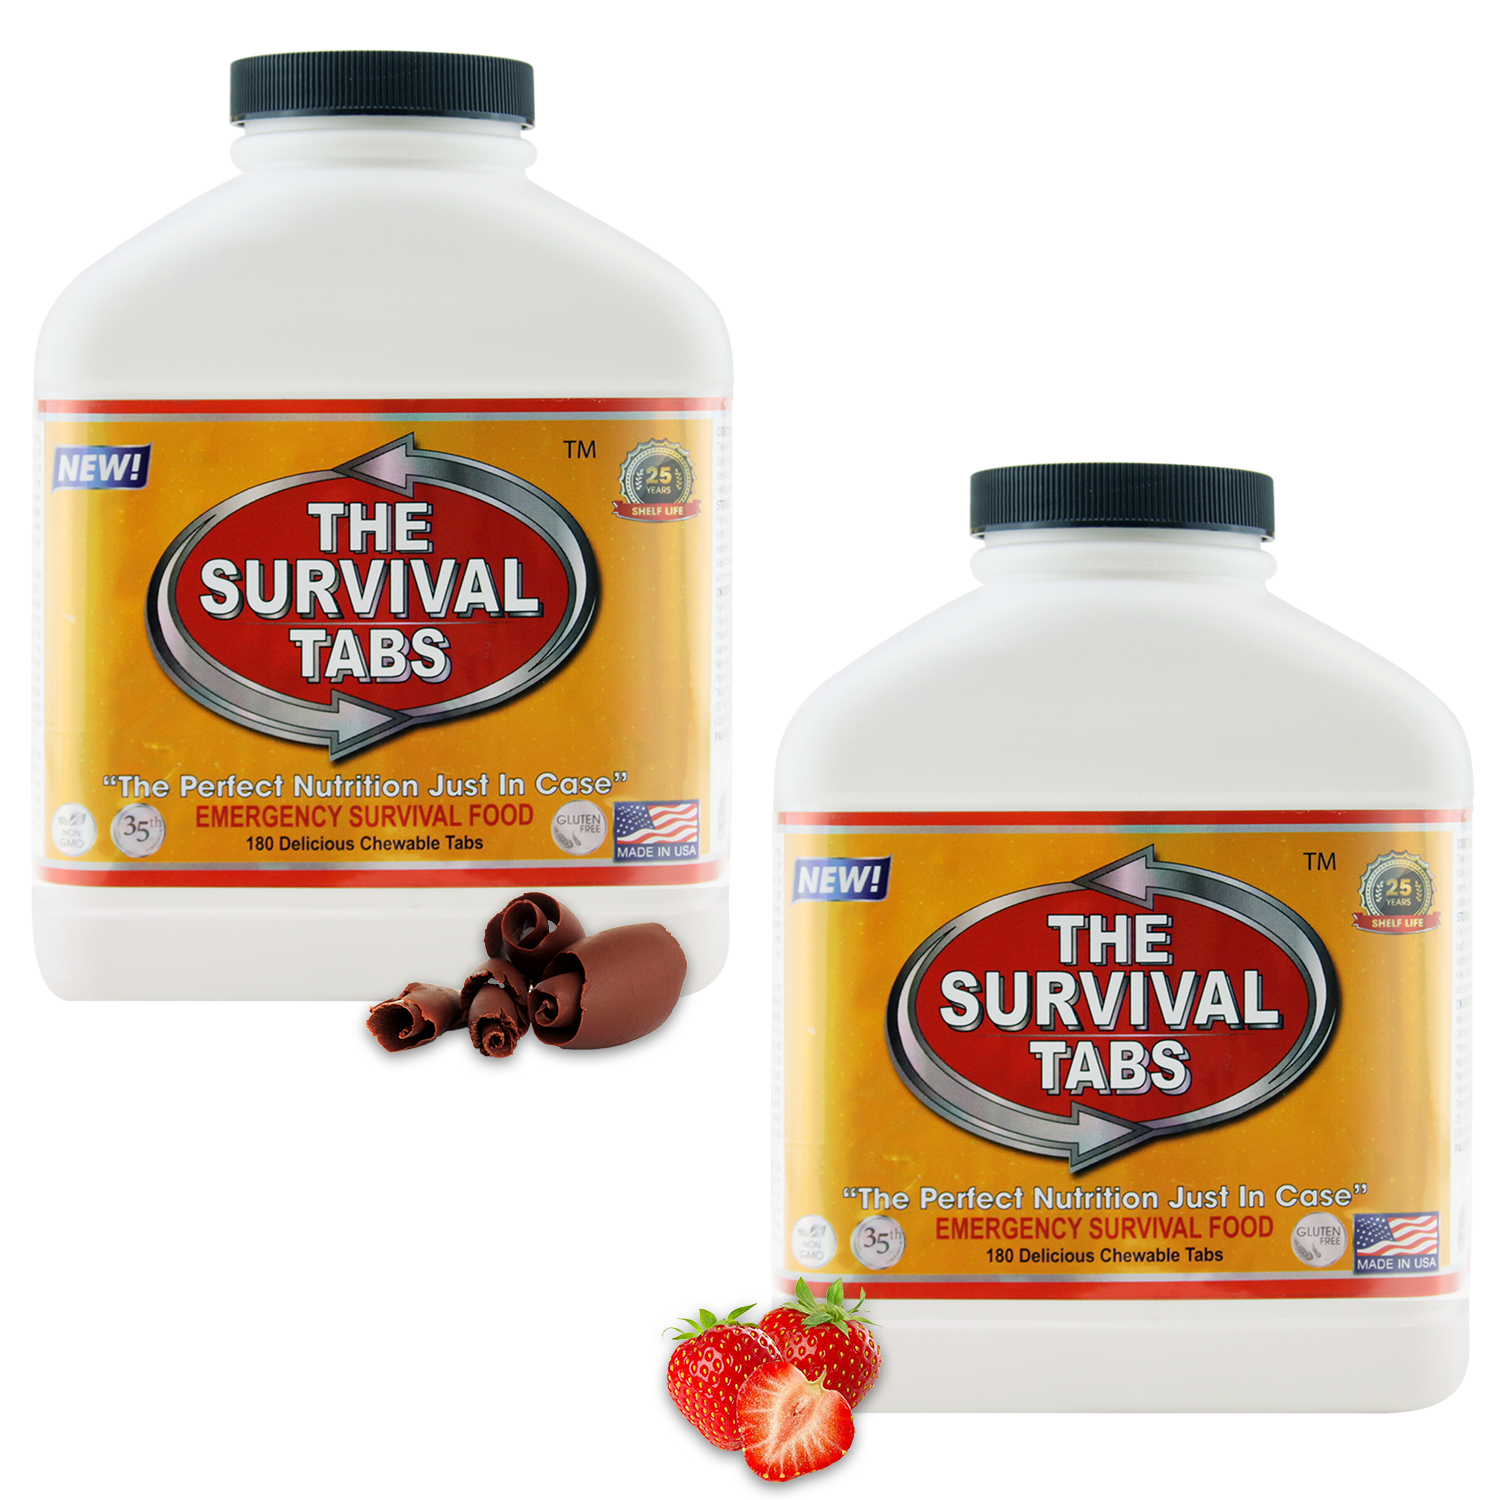 Survival Tabs. My Experience. My Review.